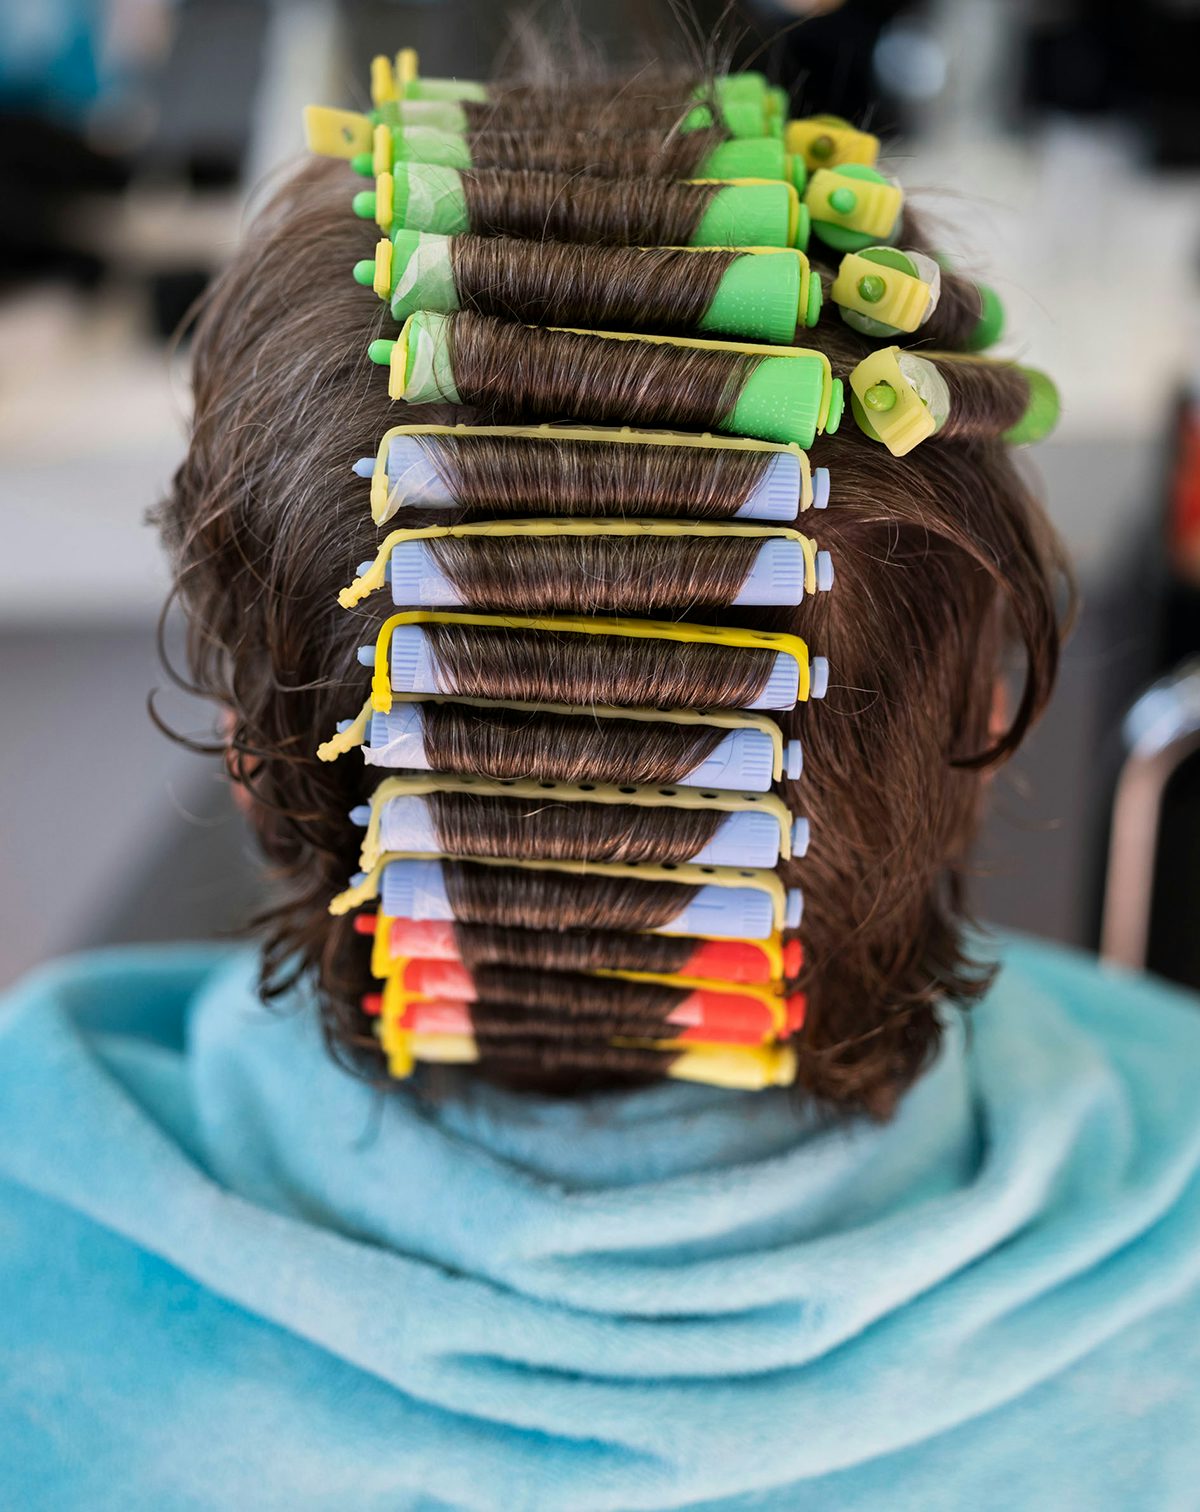 Photograph of the back of a person's head wearing hair rollers by Magnum photographer Rafal Milach